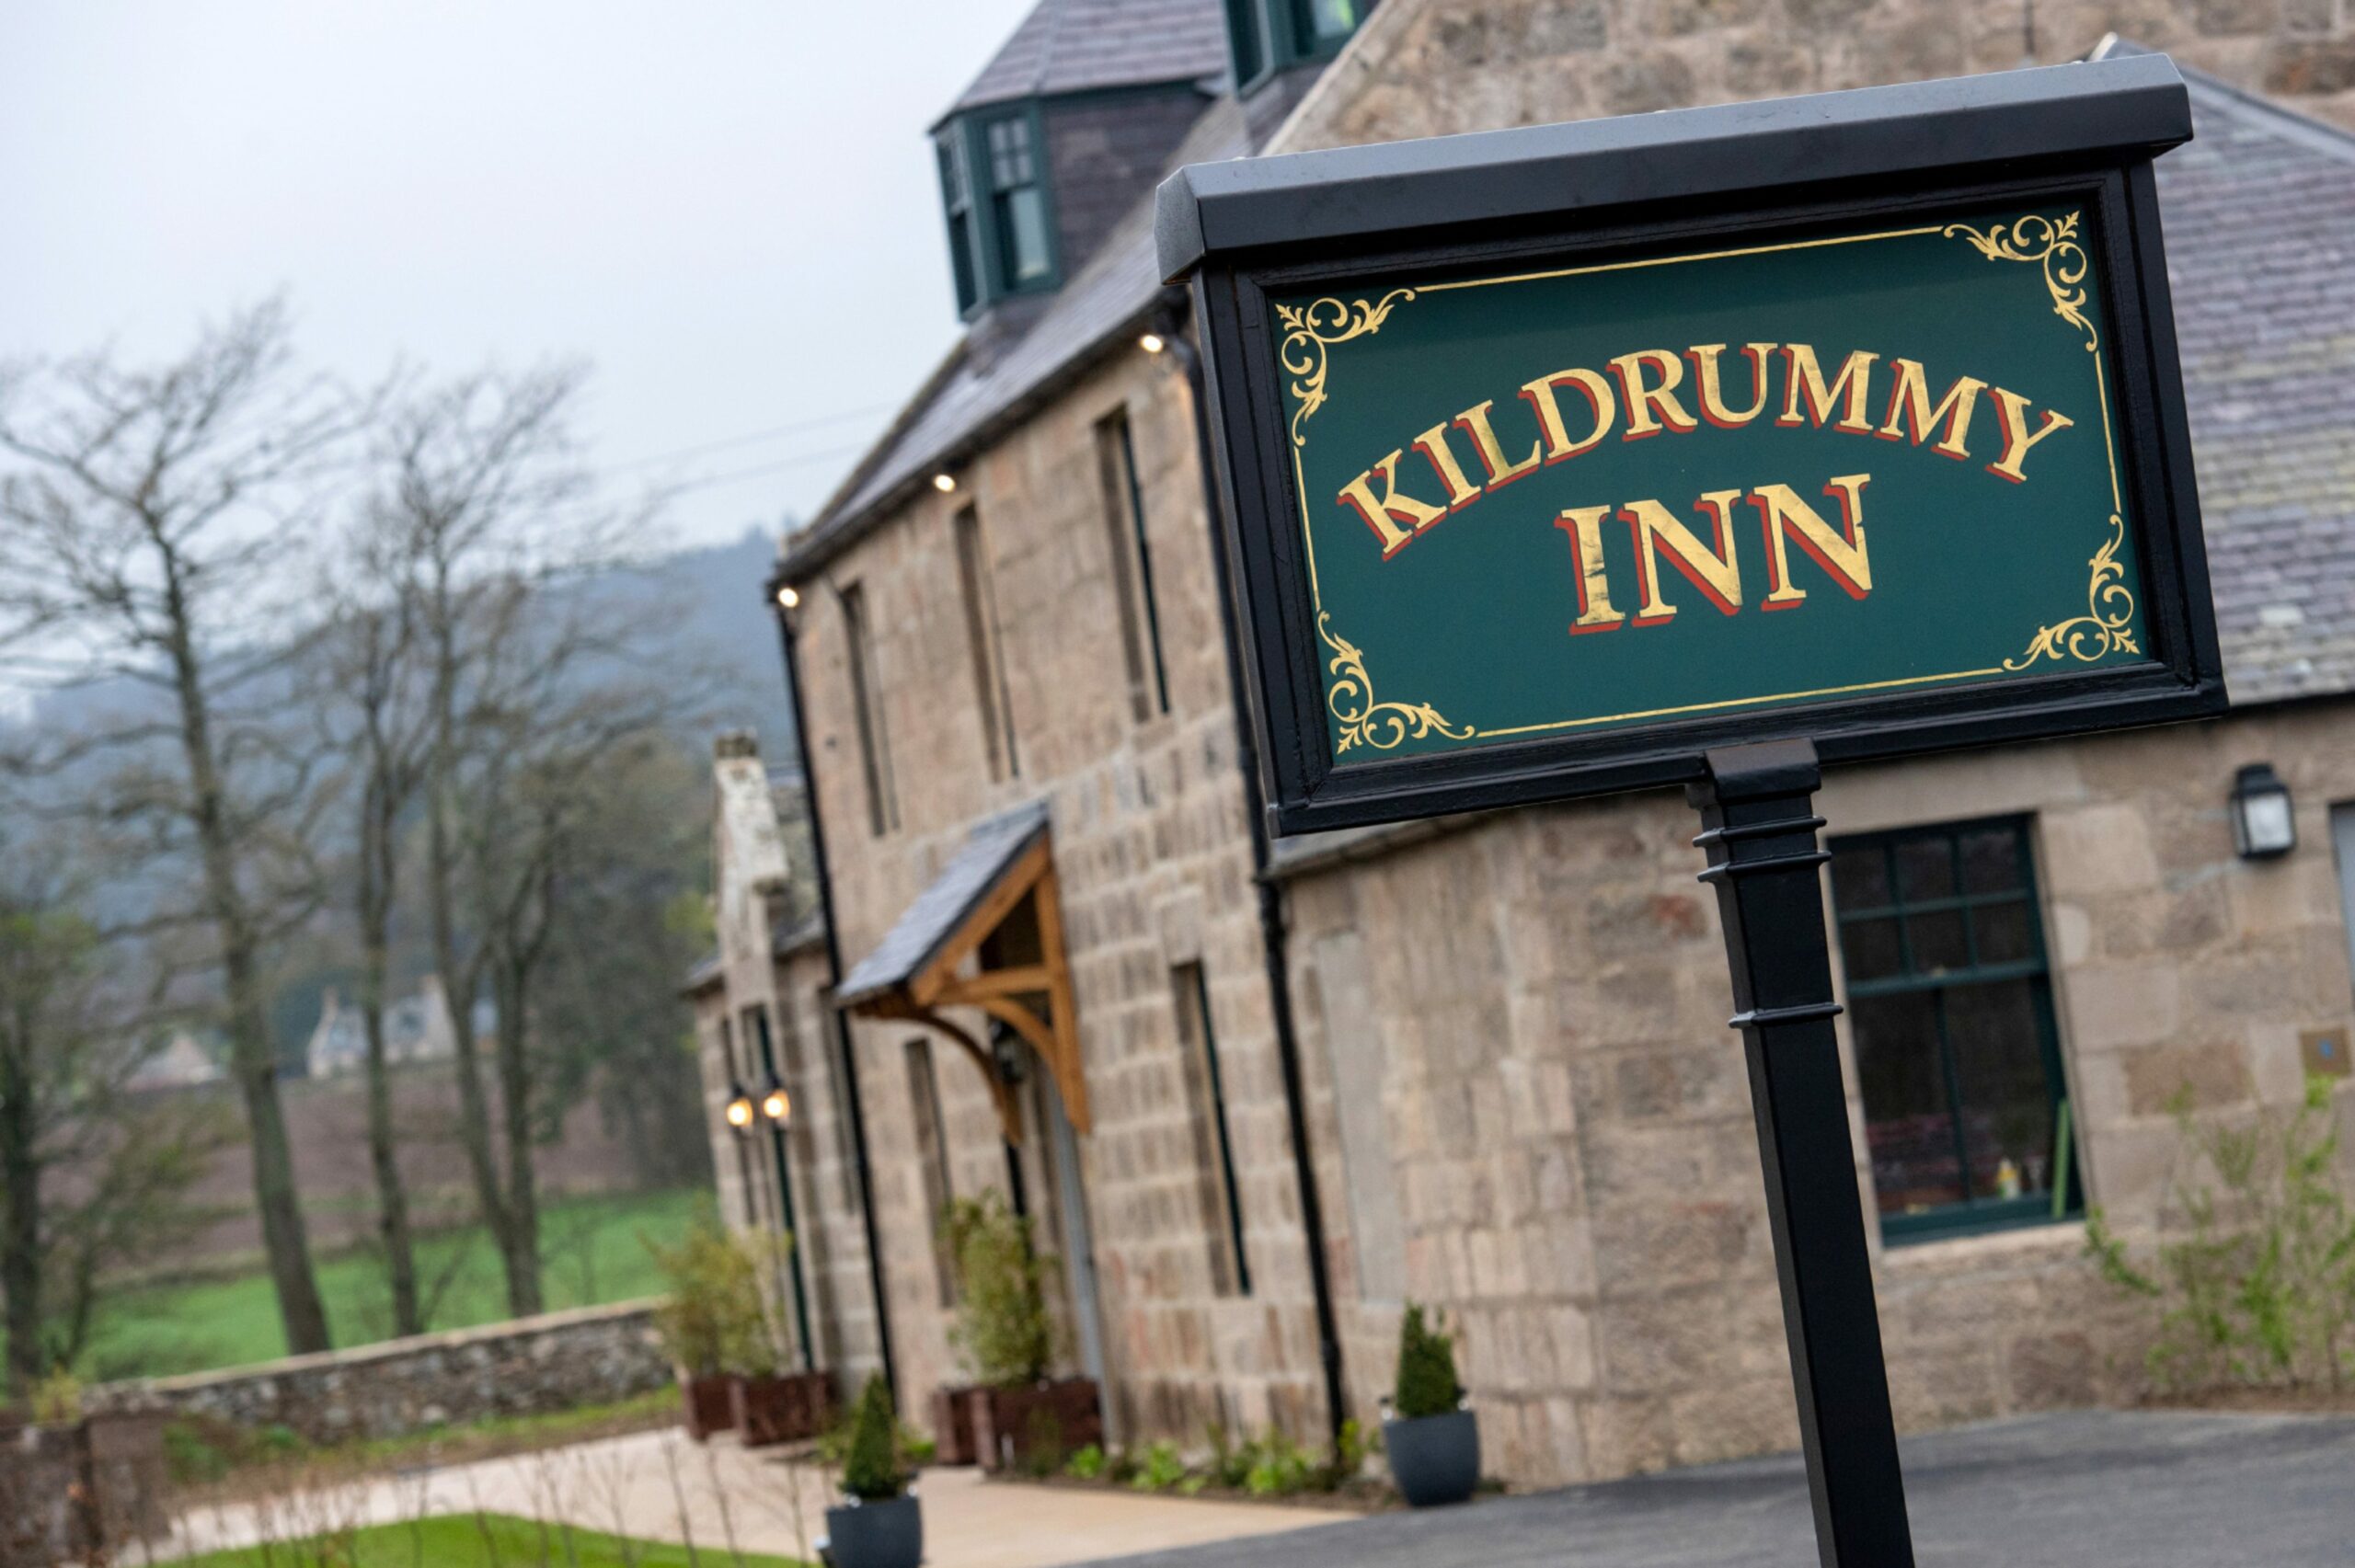 Kildrummy Inn shops plans have been lodged